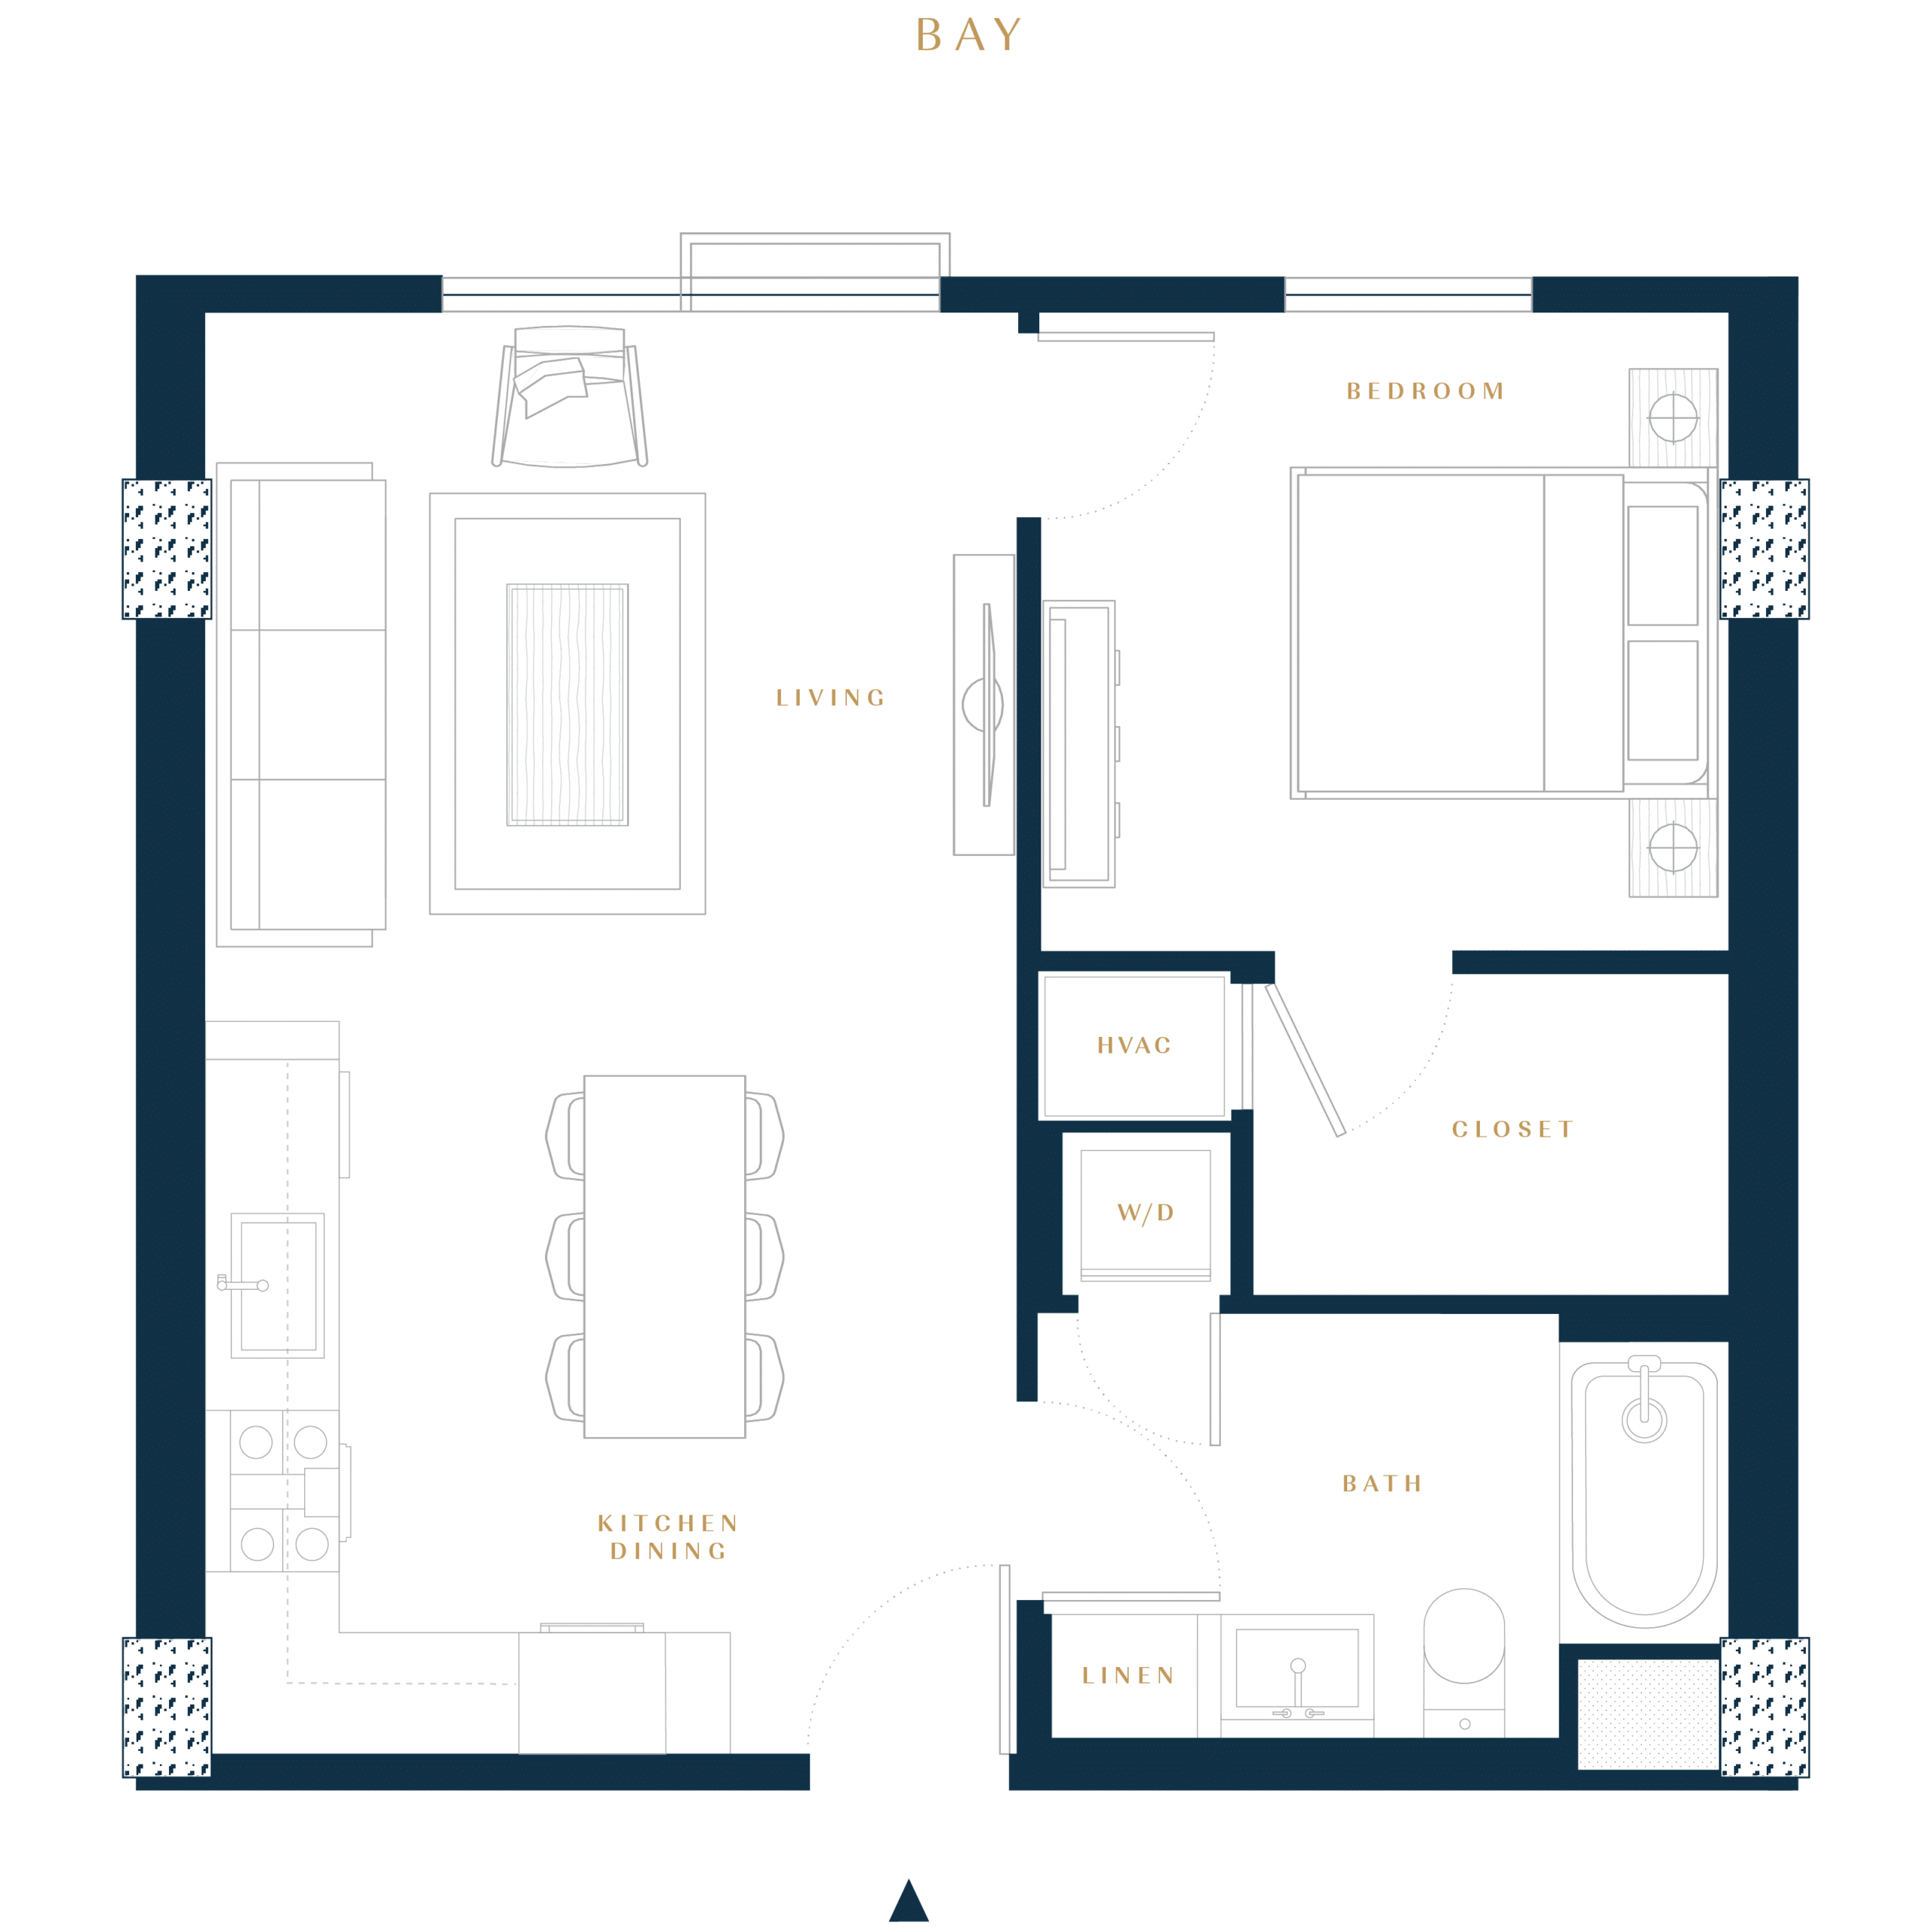 Residence 1A luxury condo floor plan in San Francisco Dogpatch